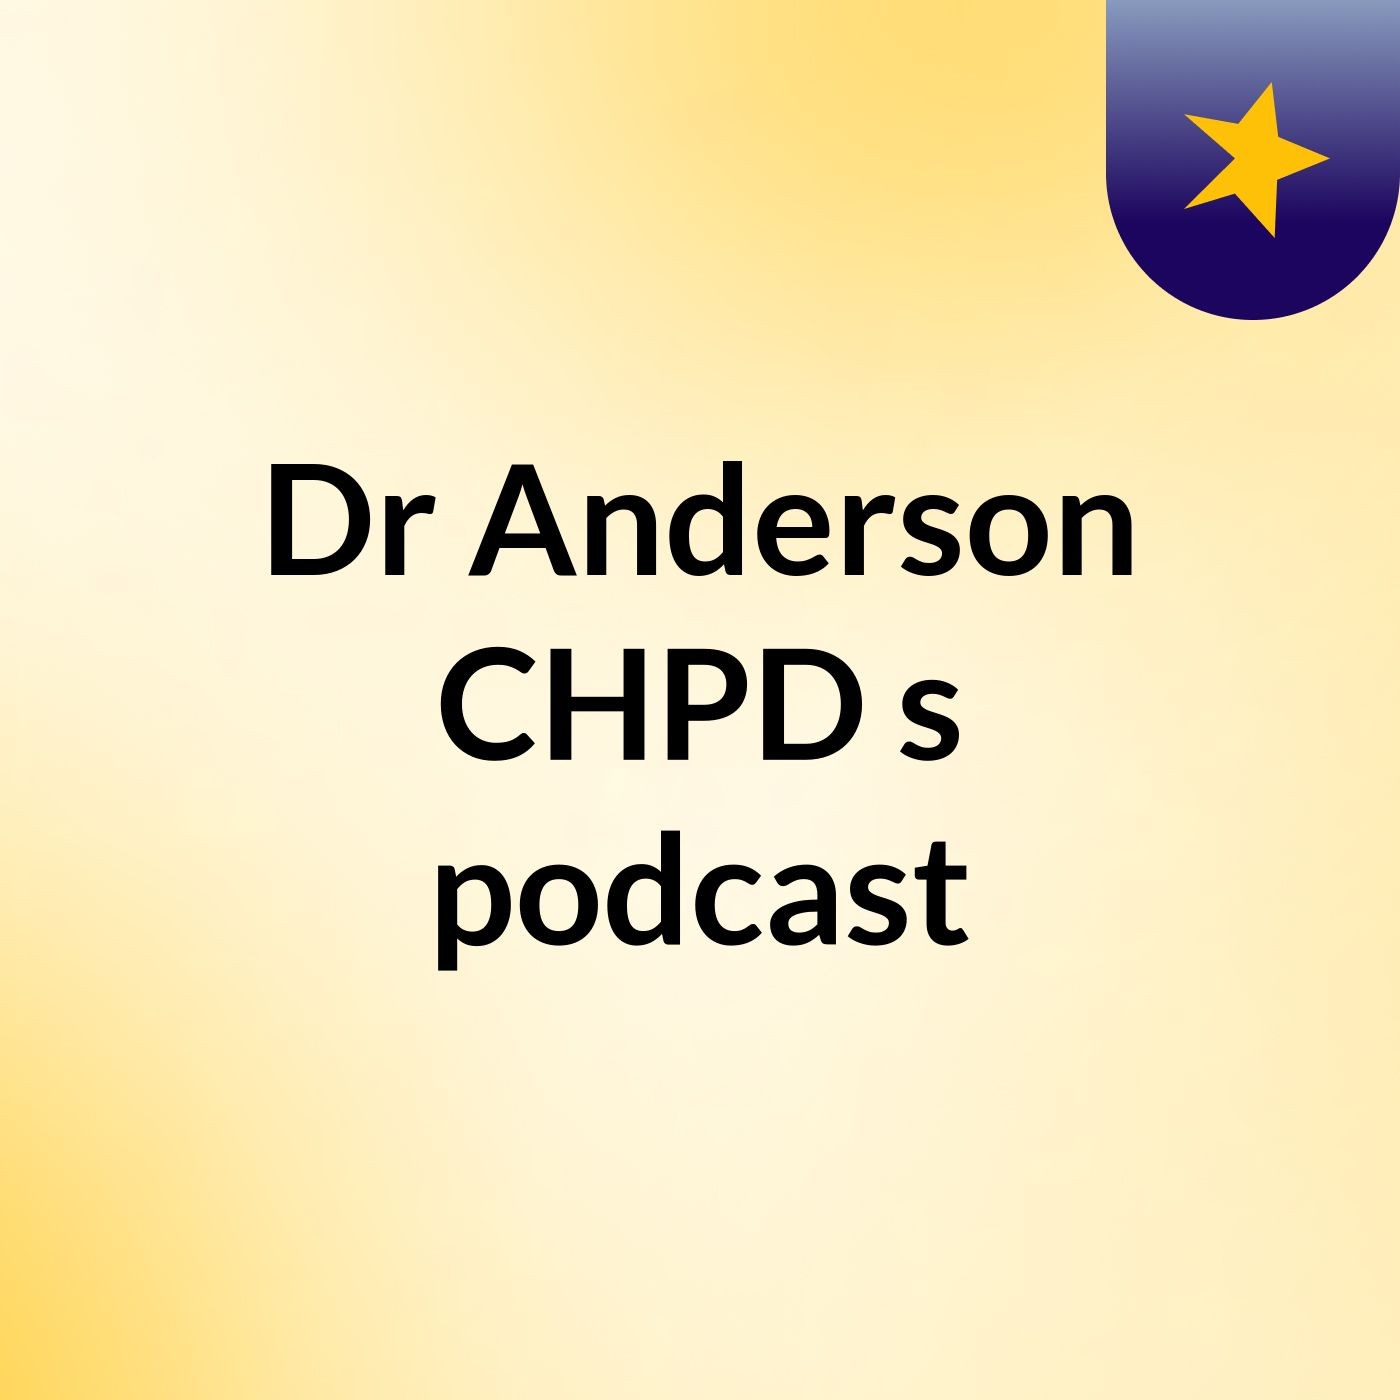 Dr Anderson CHPD's podcast